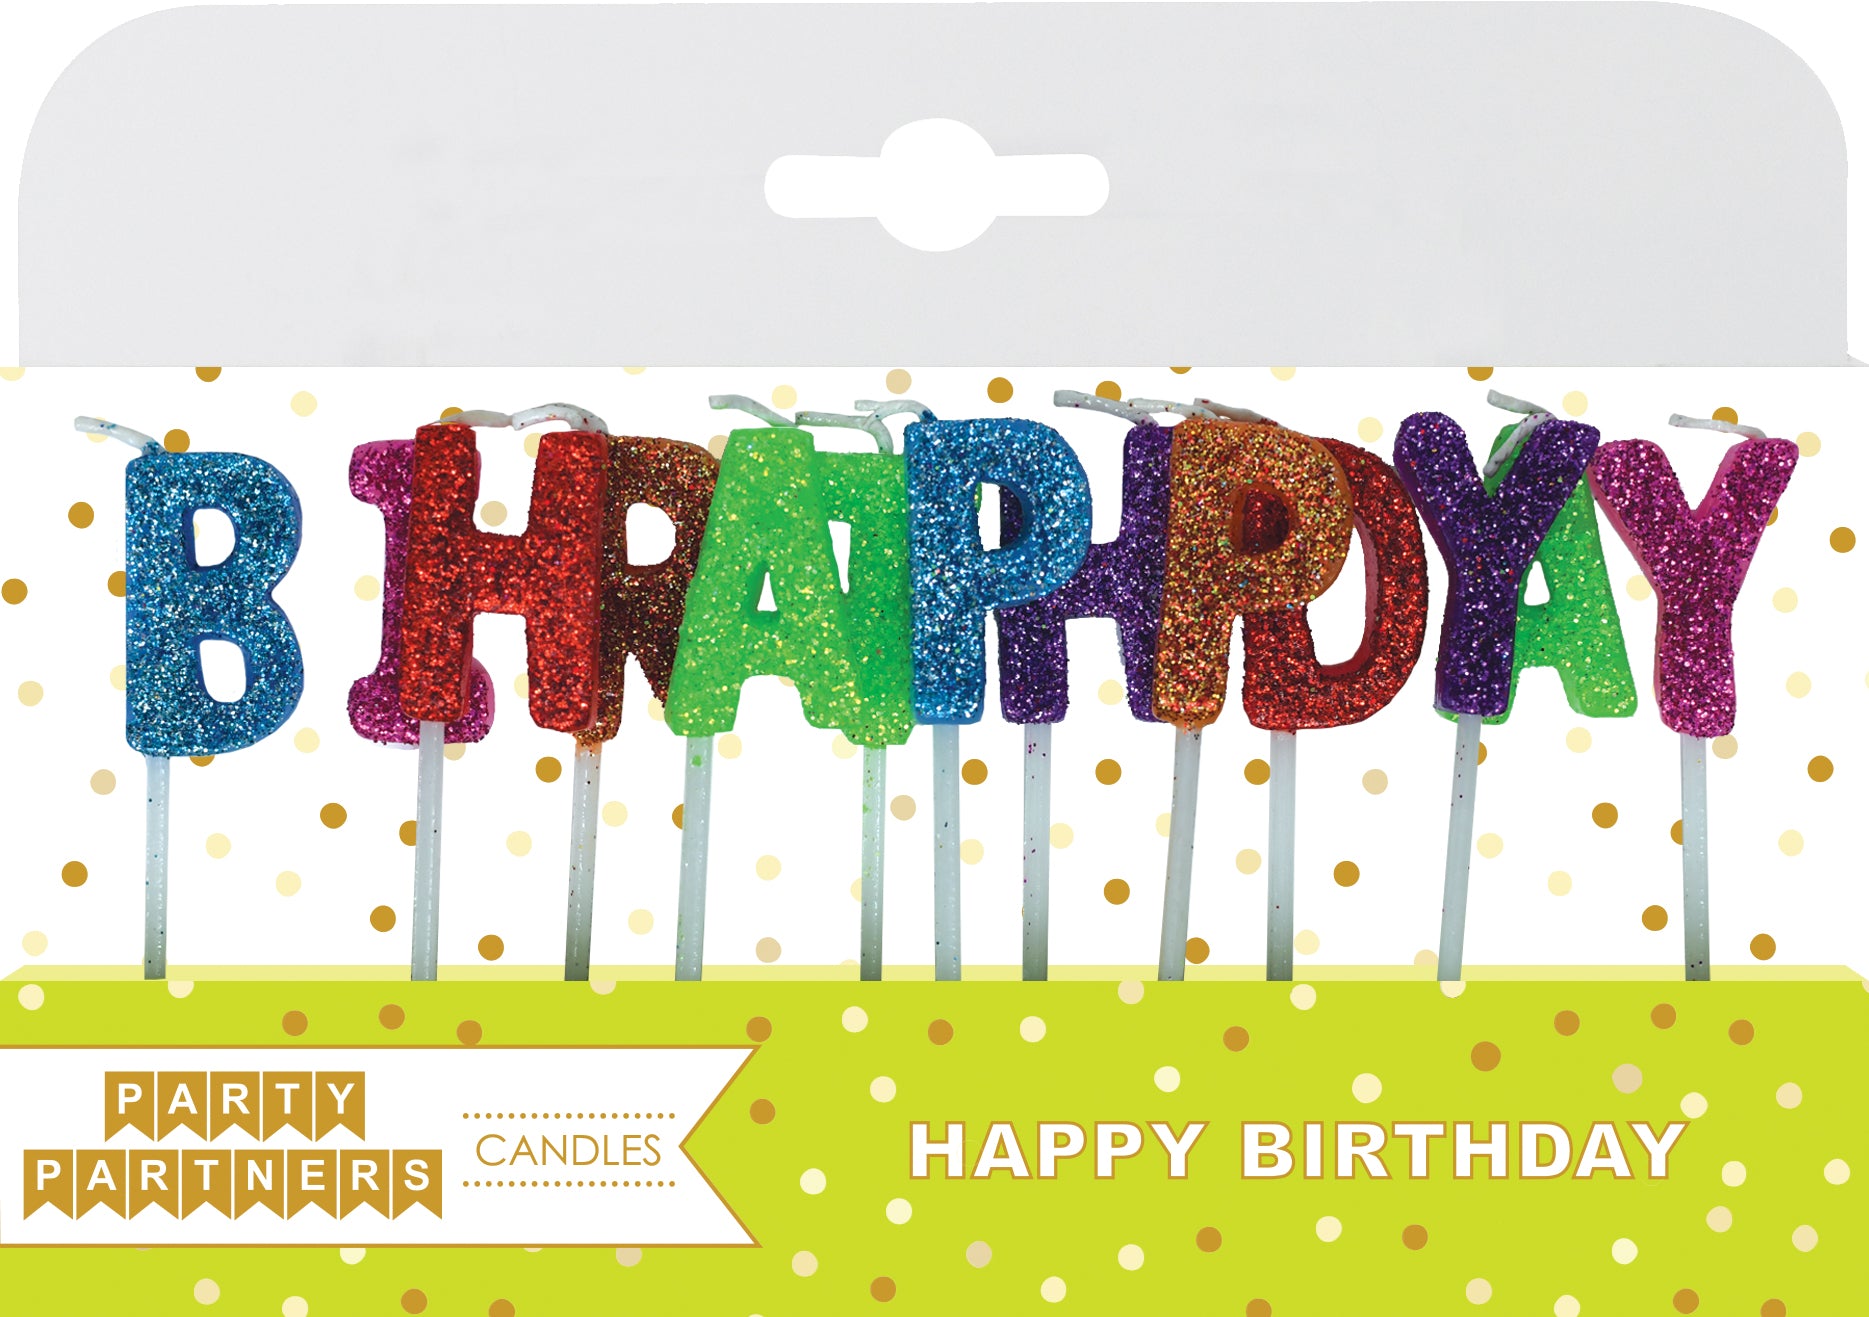 Happy Birthday Letter Glitter Candle Set Party Partners - Cardmore